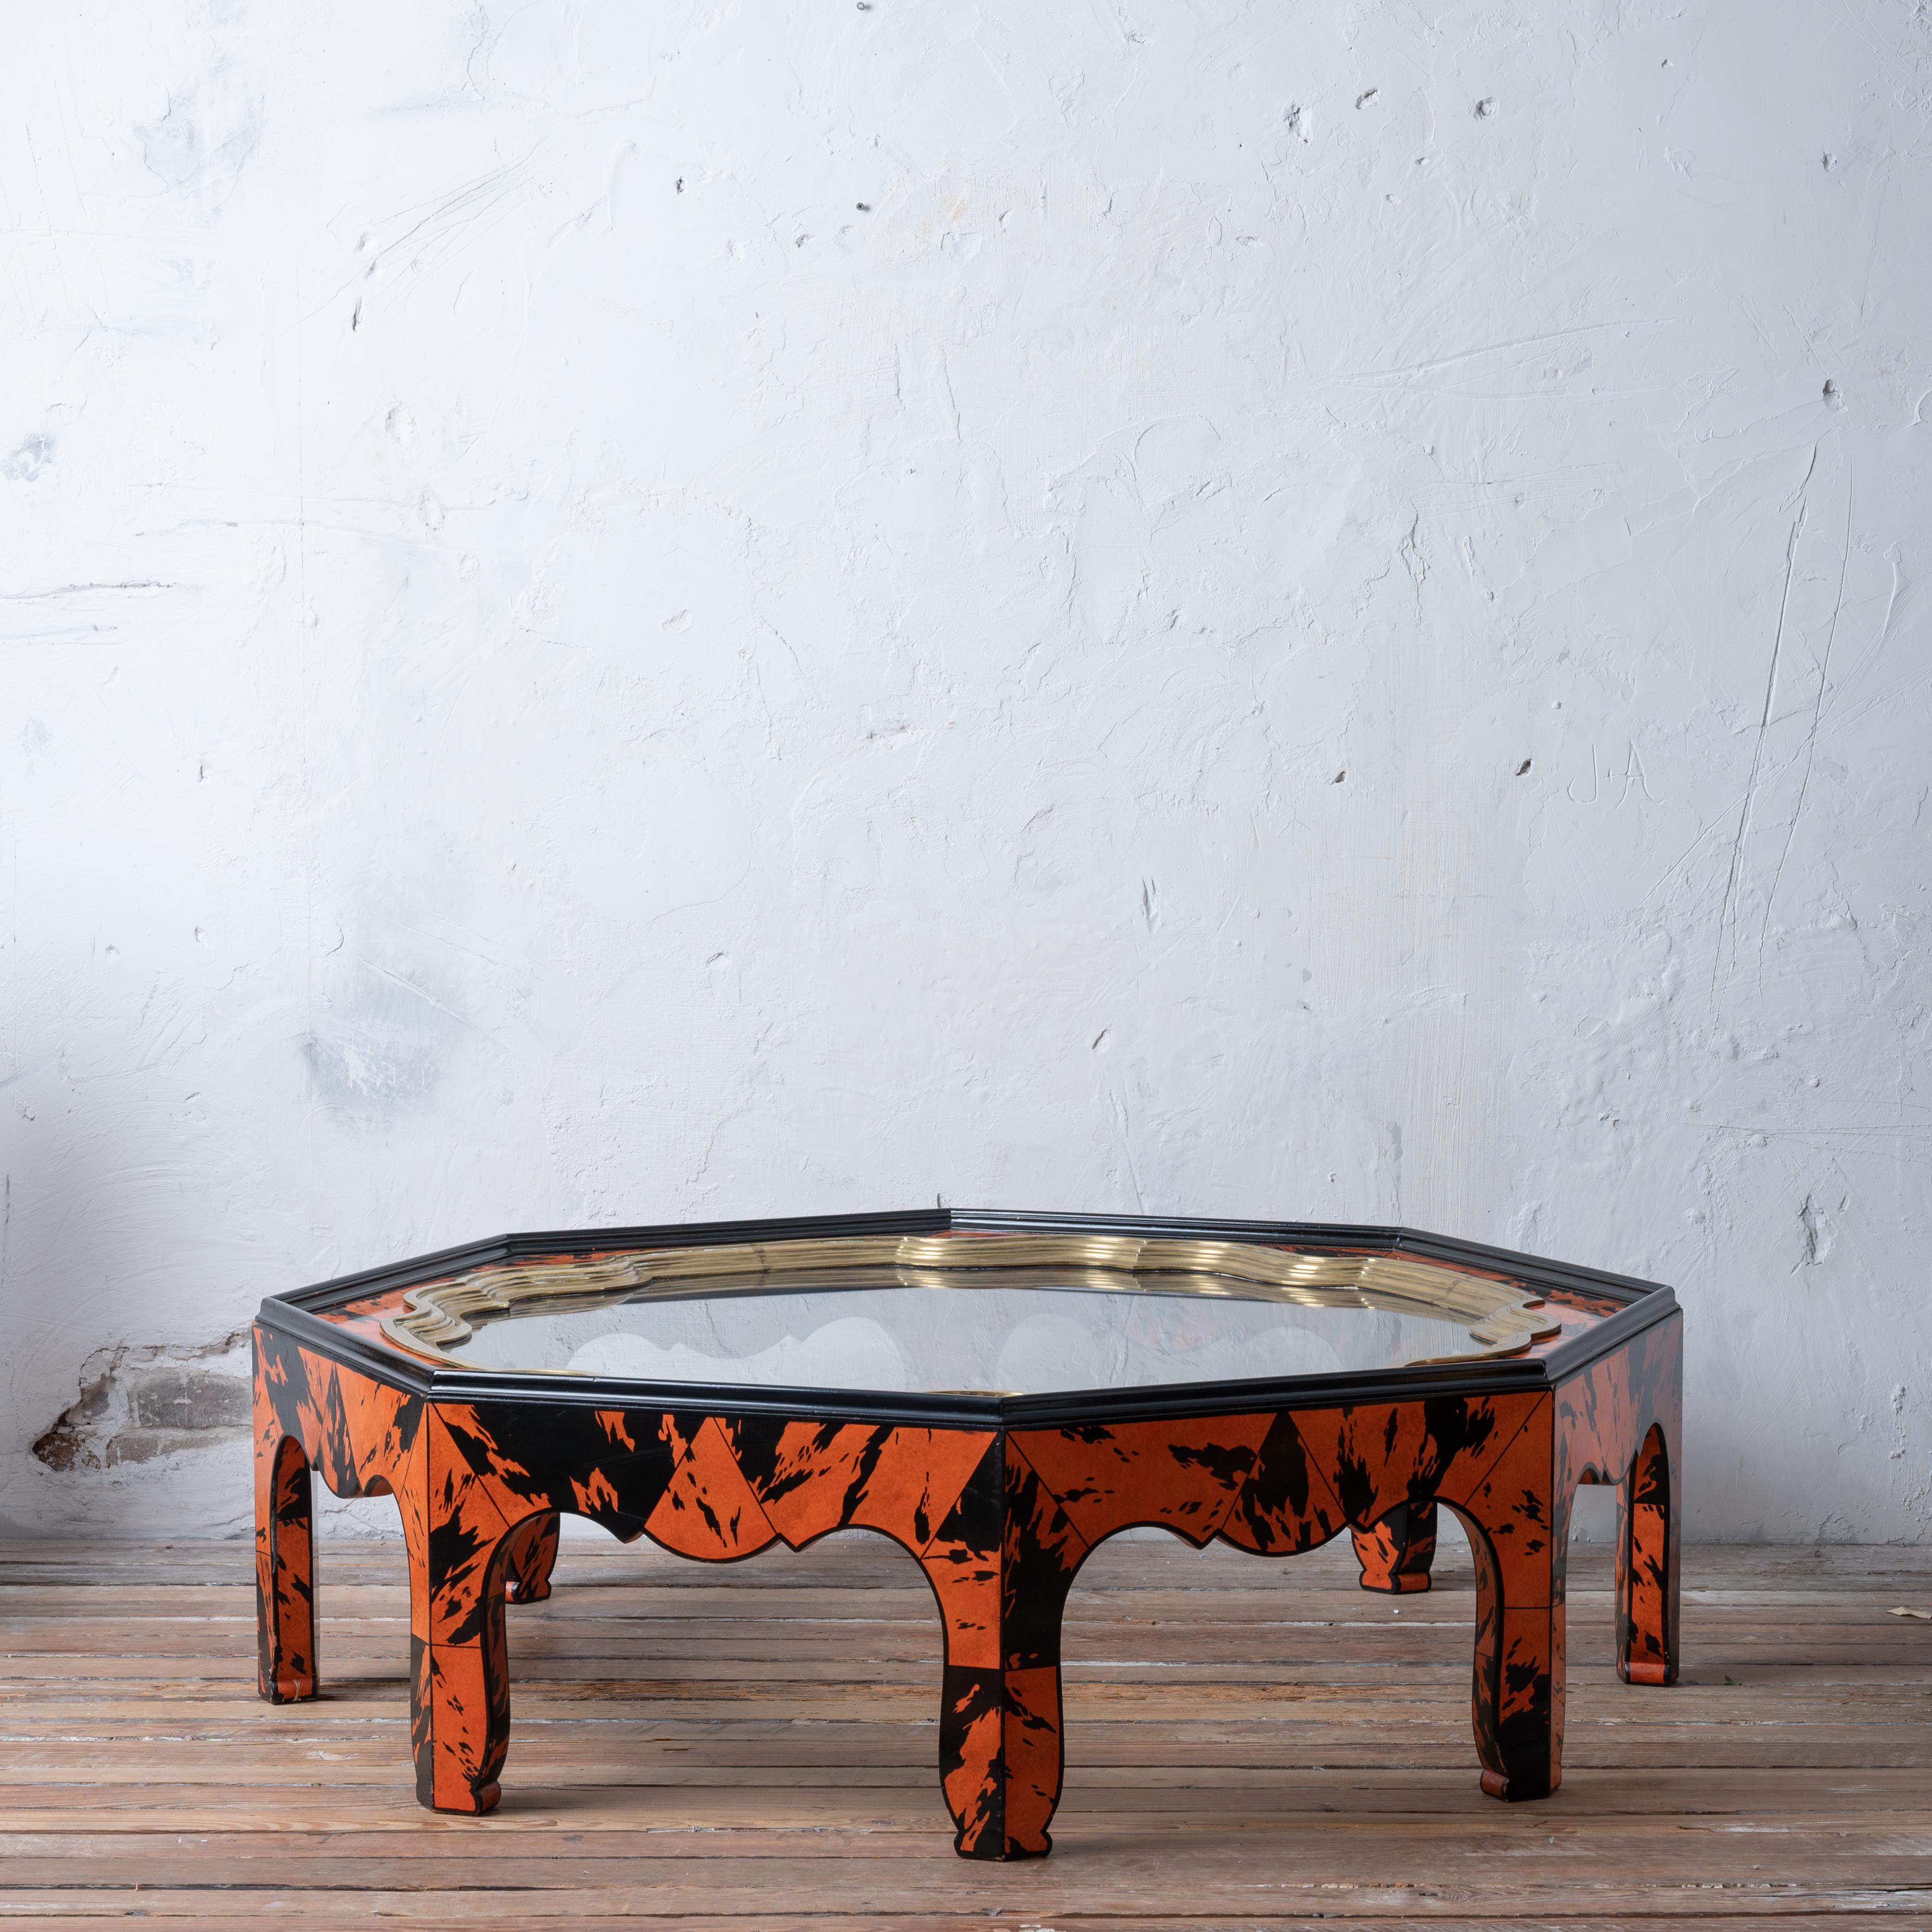 A striking octagonal coffee table with an abstract orange and black faux tortoiseshell lacquered finish by Alessandro Gabrielli Gambalogna for Baker, circa 1980.

Quatrefoil brass lined glass top is removable. 

53 inches wide by 48 ¾ inches deep by